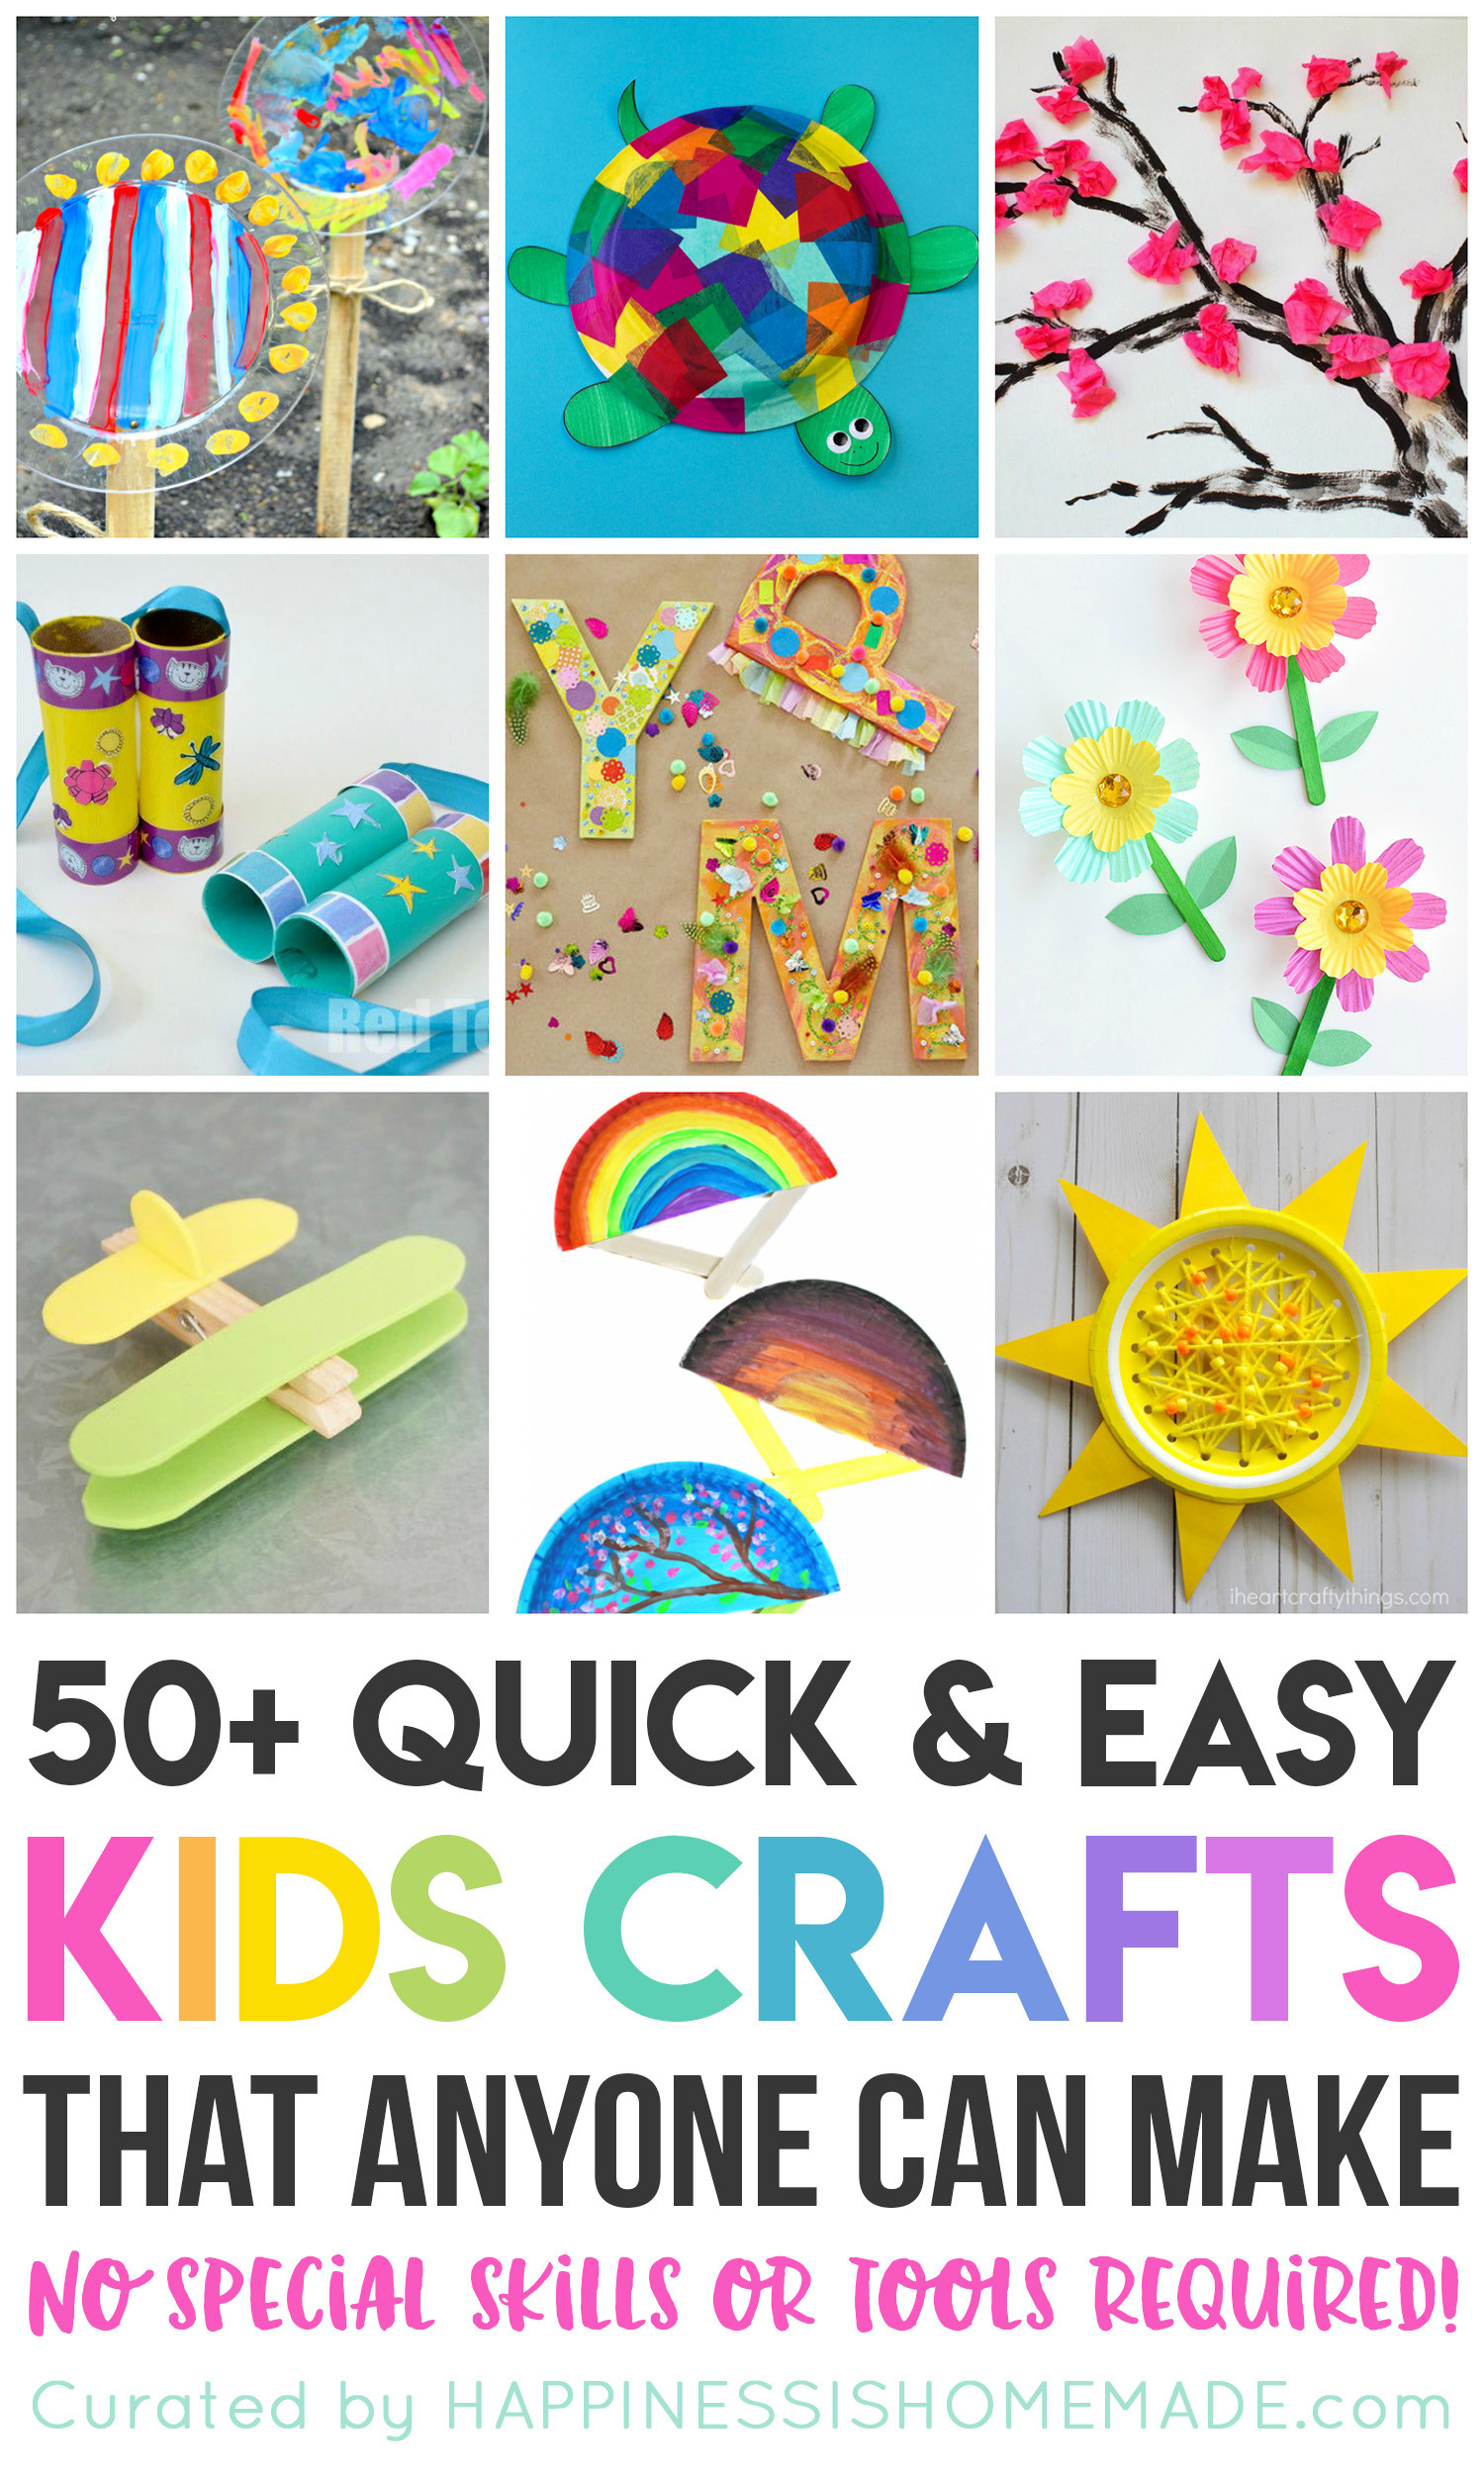 Simple Crafts For Toddlers
 50 Quick & Easy Kids Crafts that ANYONE Can Make